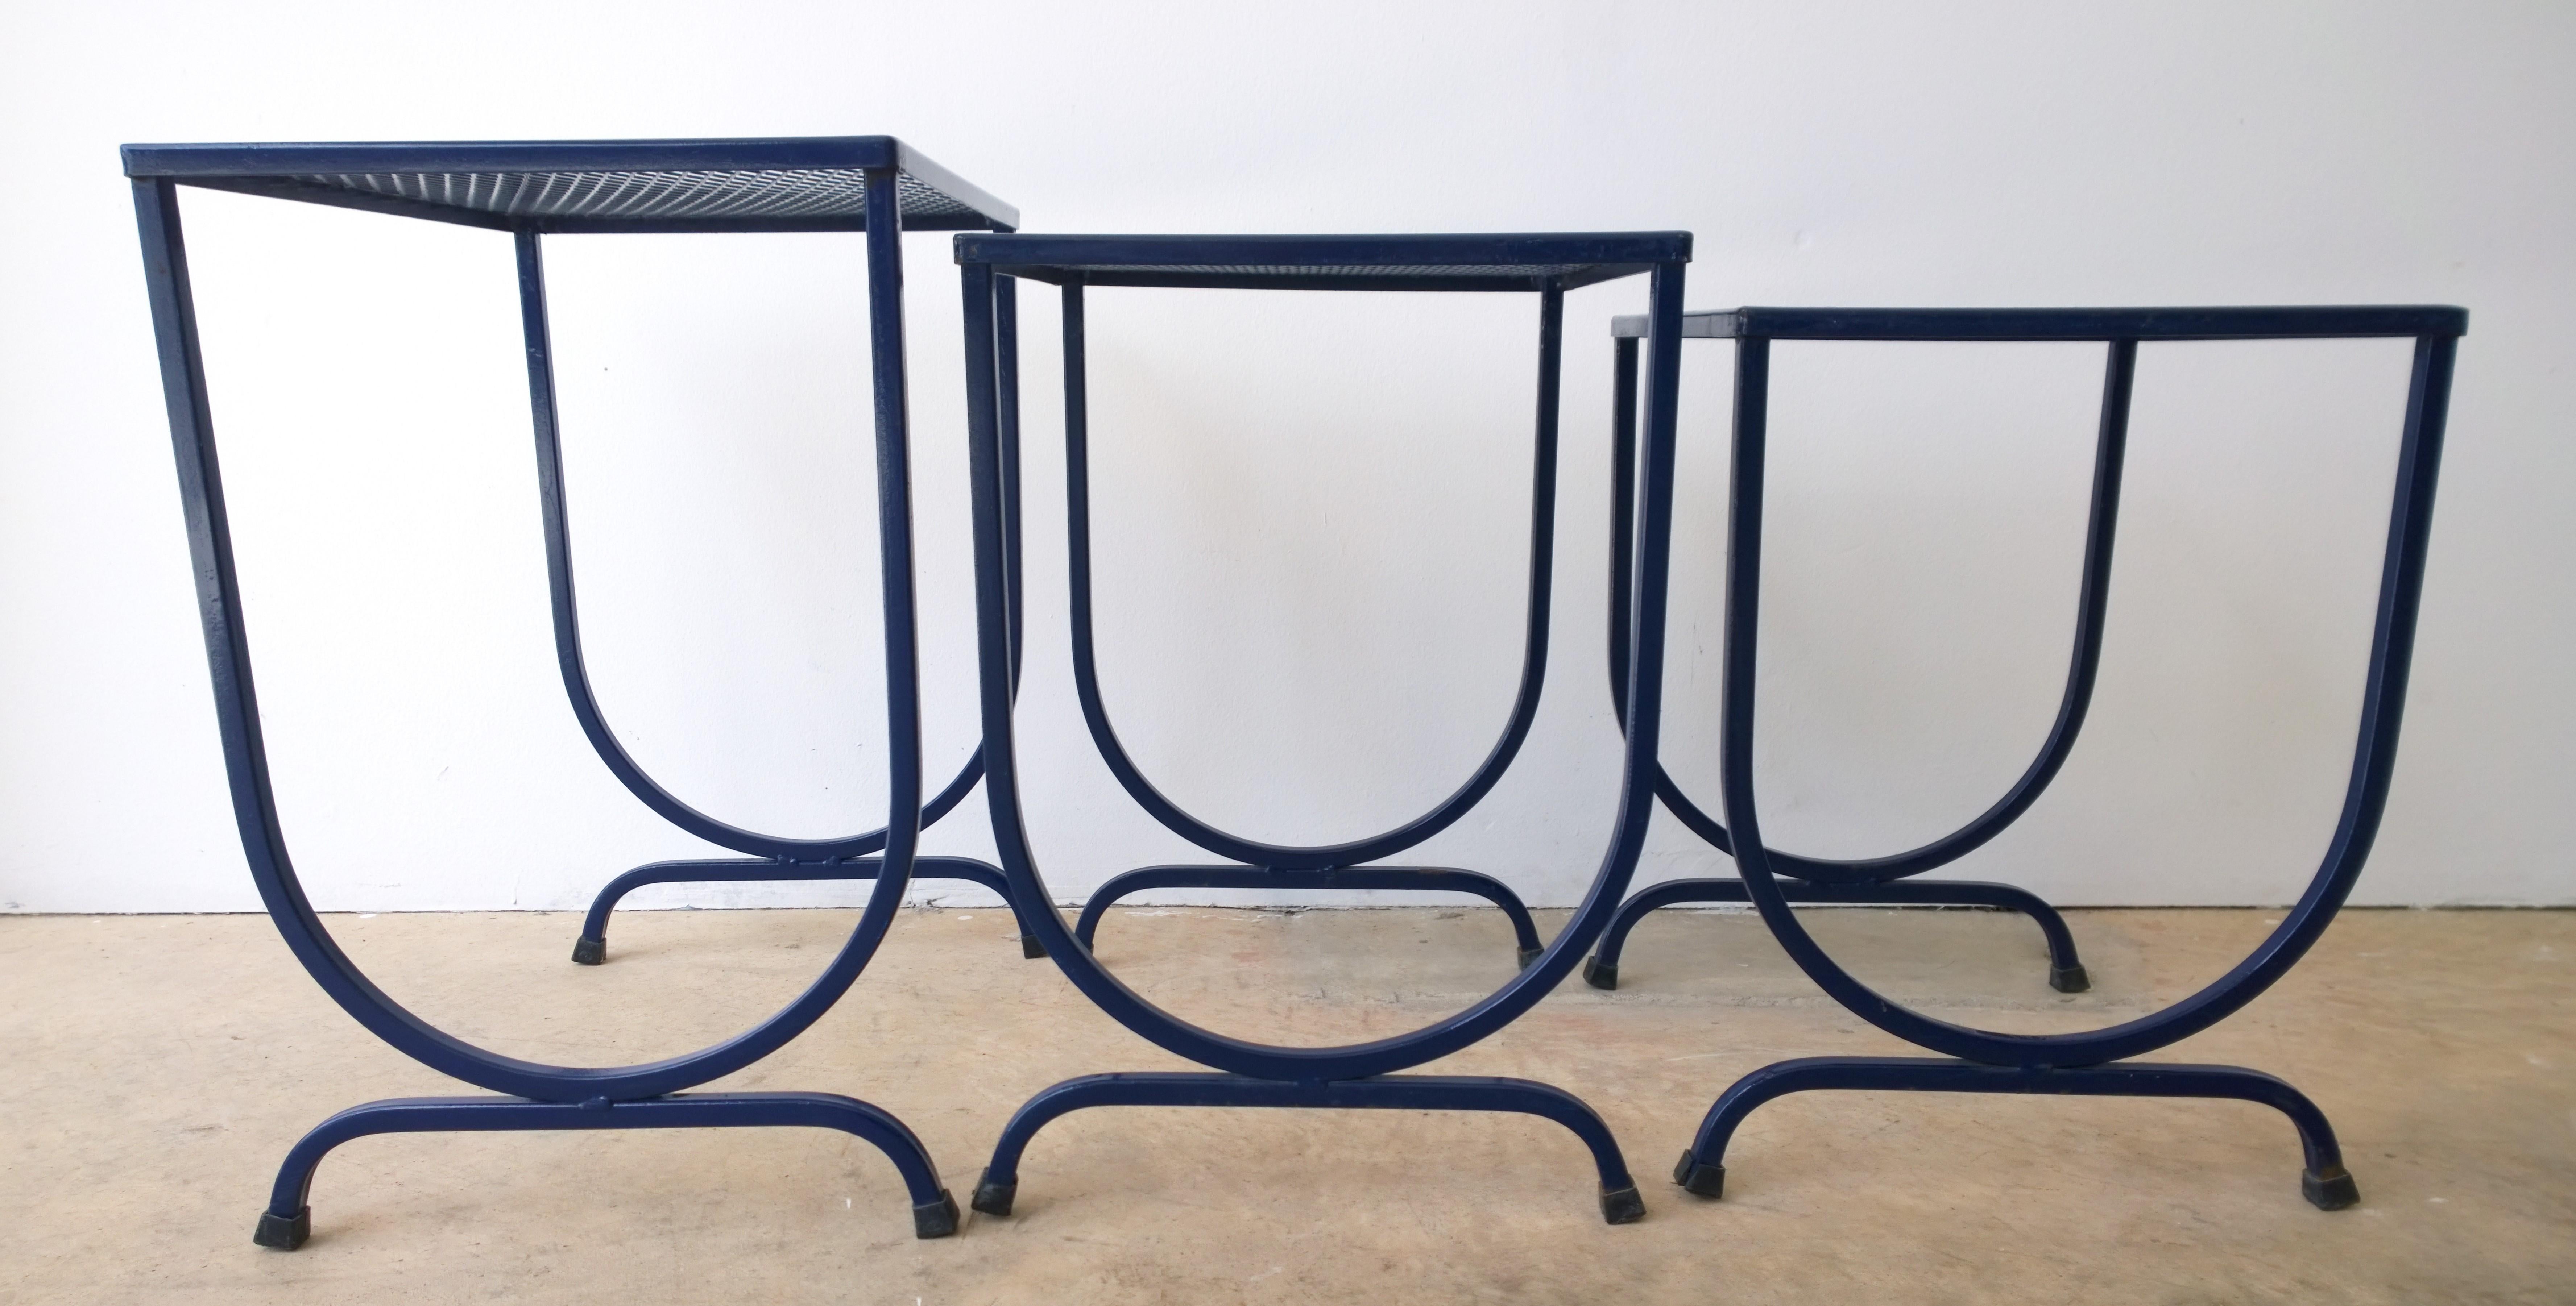 S/3 Salterini Newly Enameled Blue Wrought Iron Patio Stacking / Nesting Tables 7